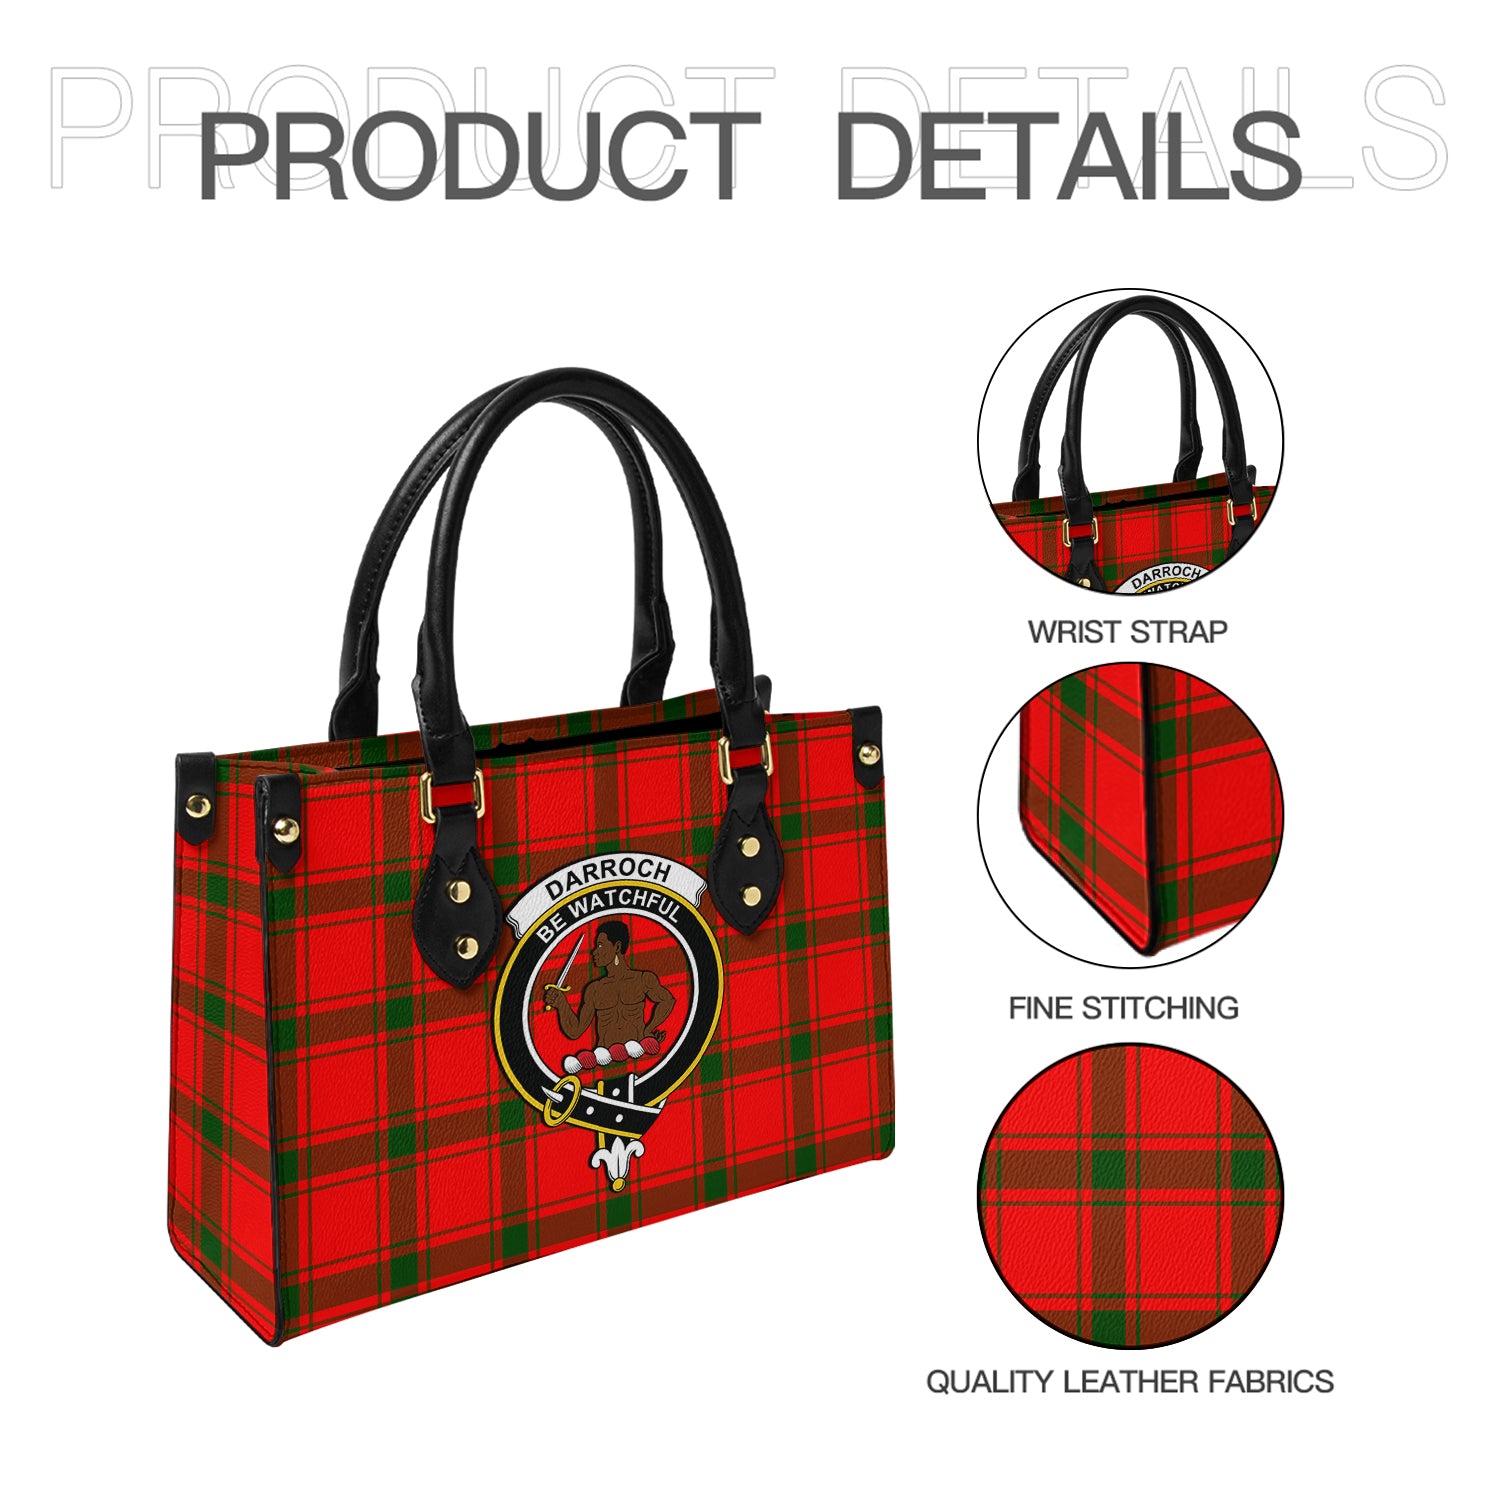 darroch-tartan-leather-bag-with-family-crest